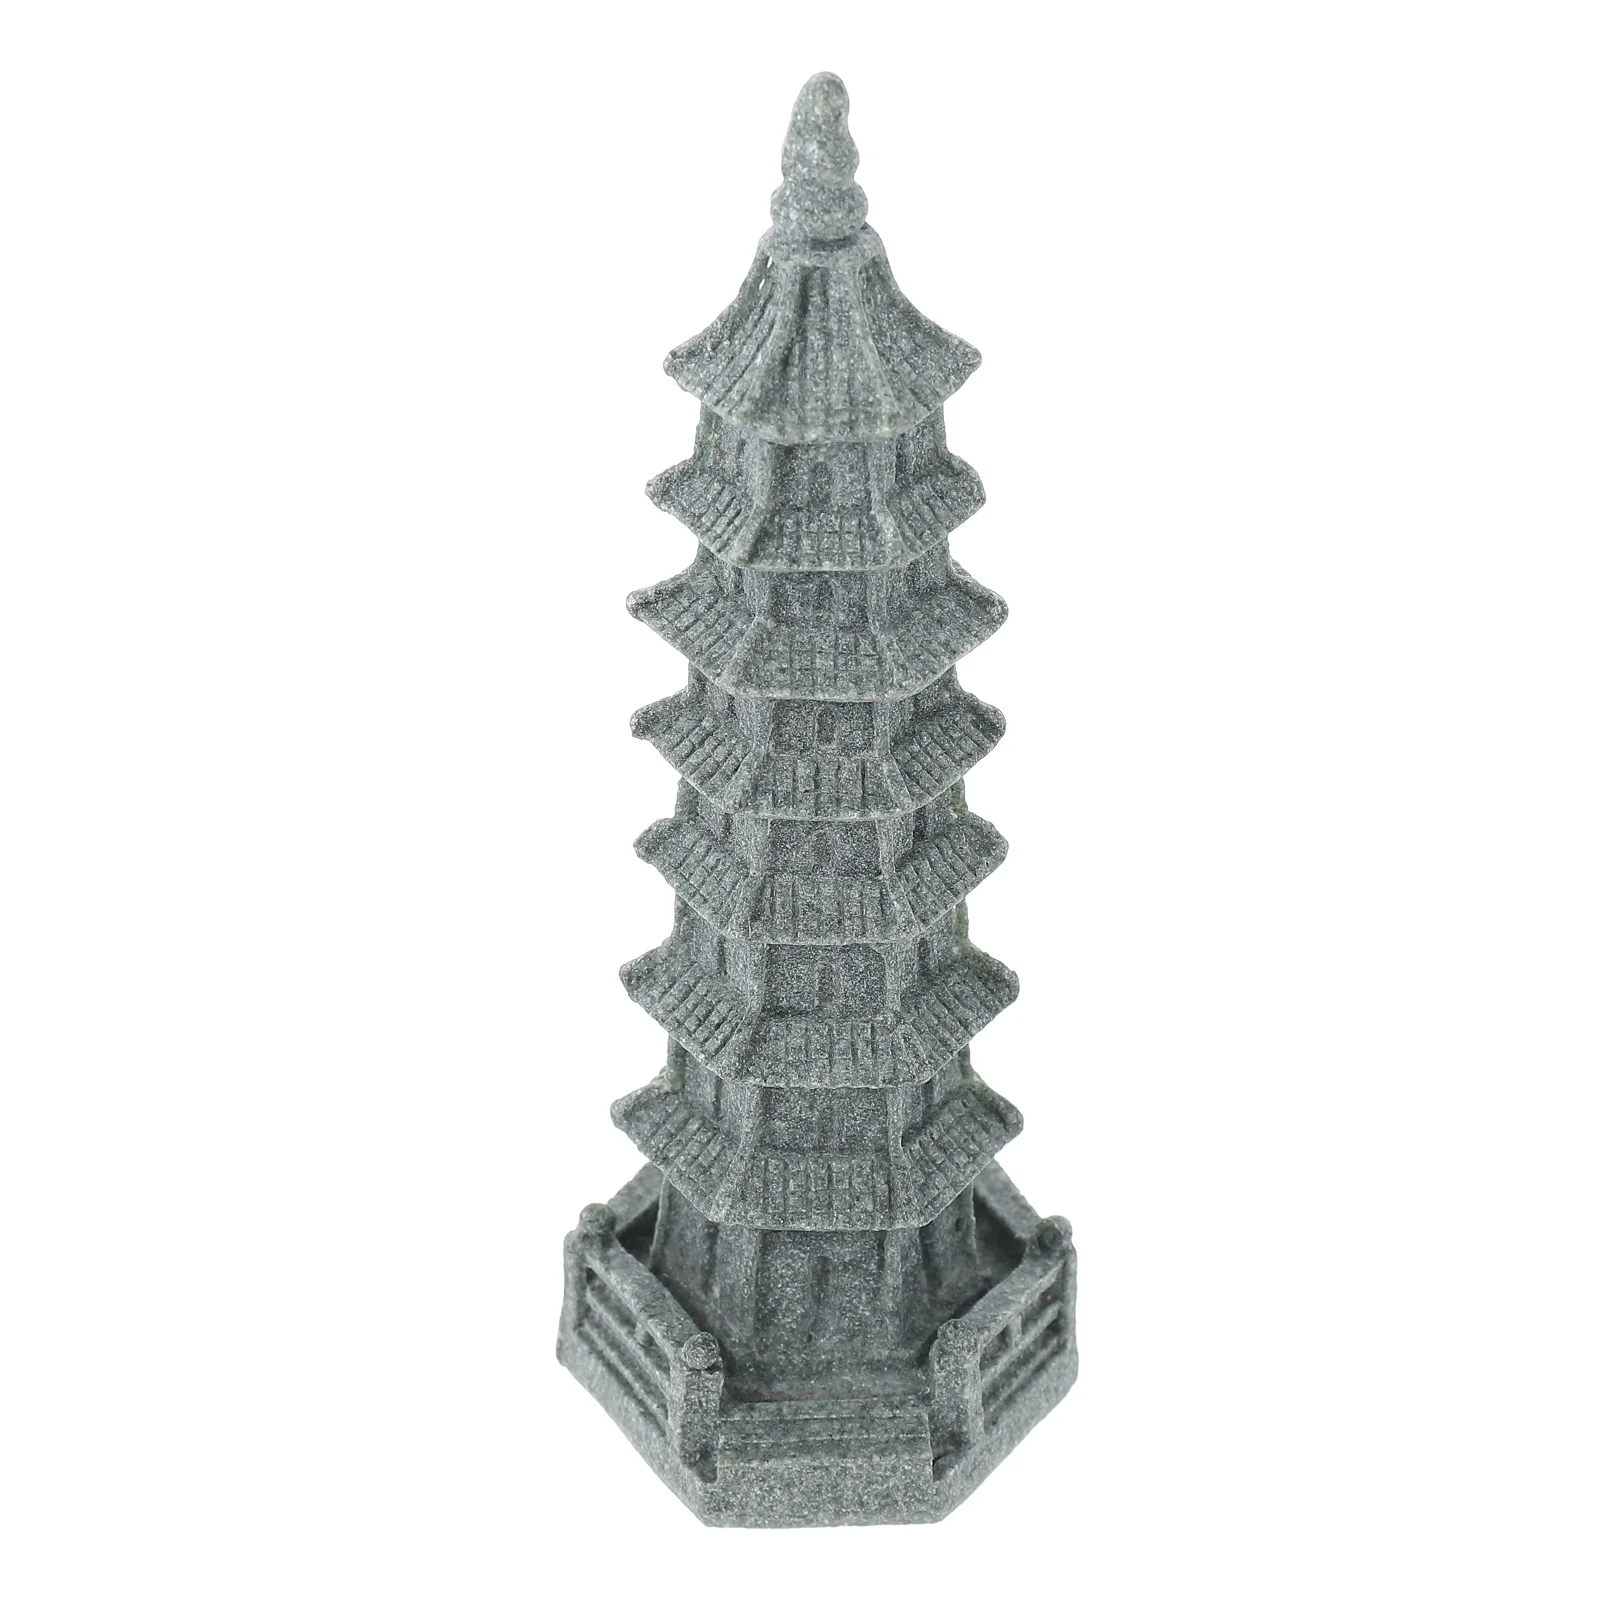 

Simulated Wenchang Tower Pagoda Statue Decor Garden Shape Zen Statues Outdoor Gardening Ornaments Tabletop Decorations Model